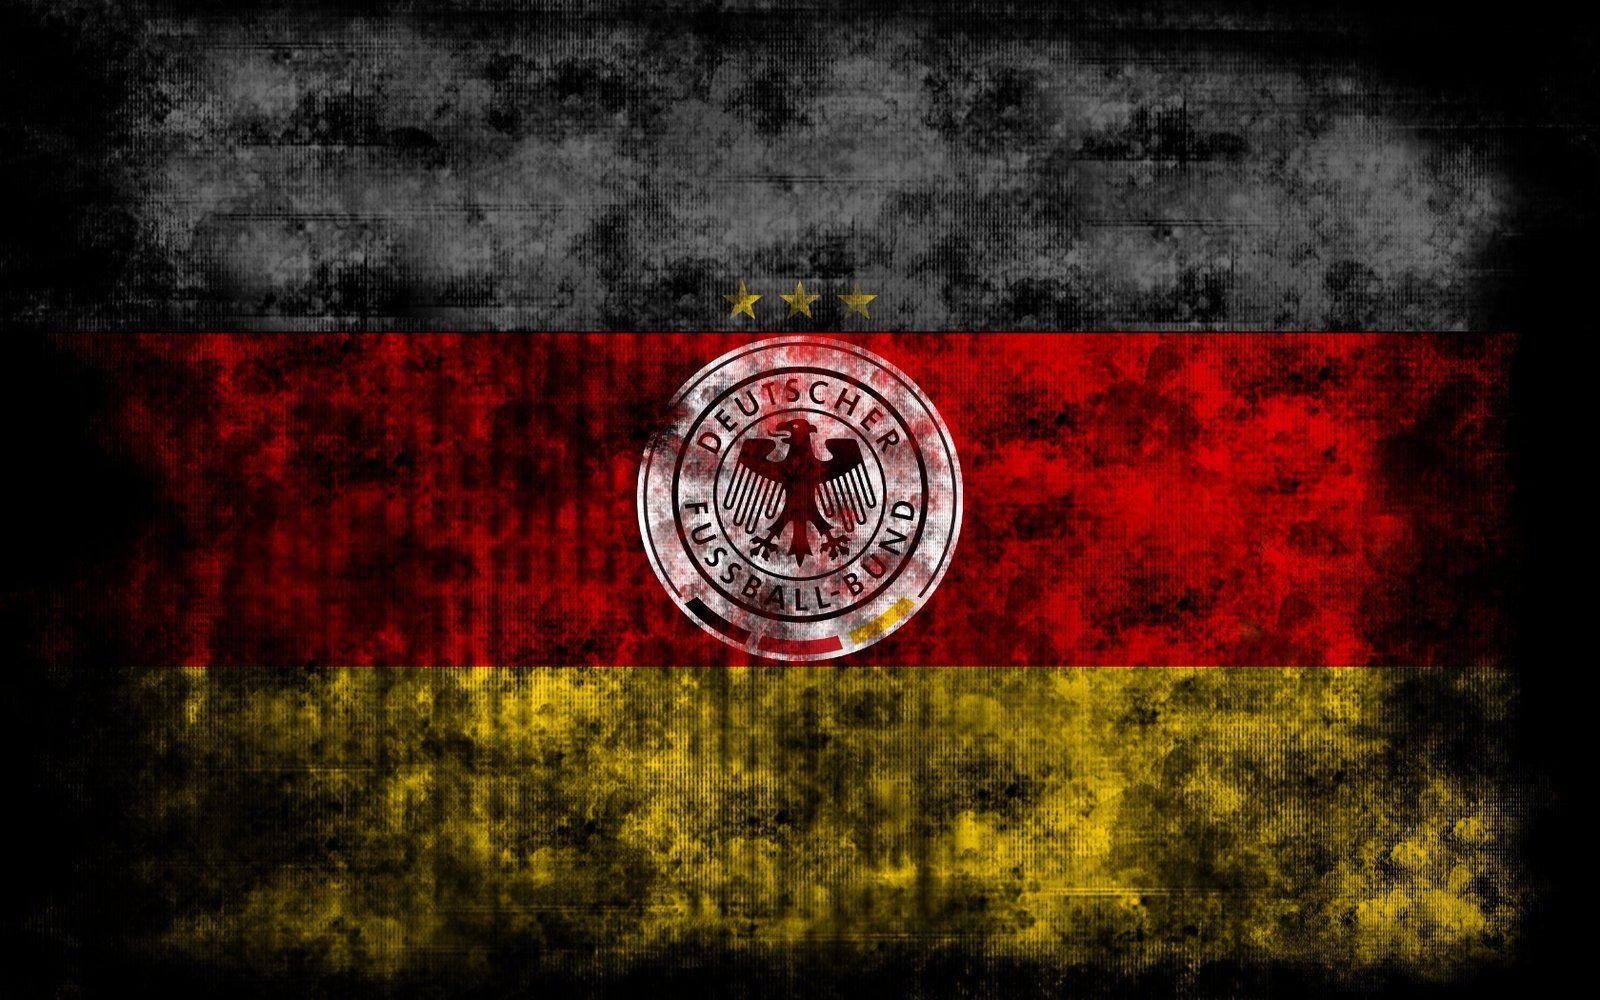 Germany Football Team Wallpaper and Football Information That You